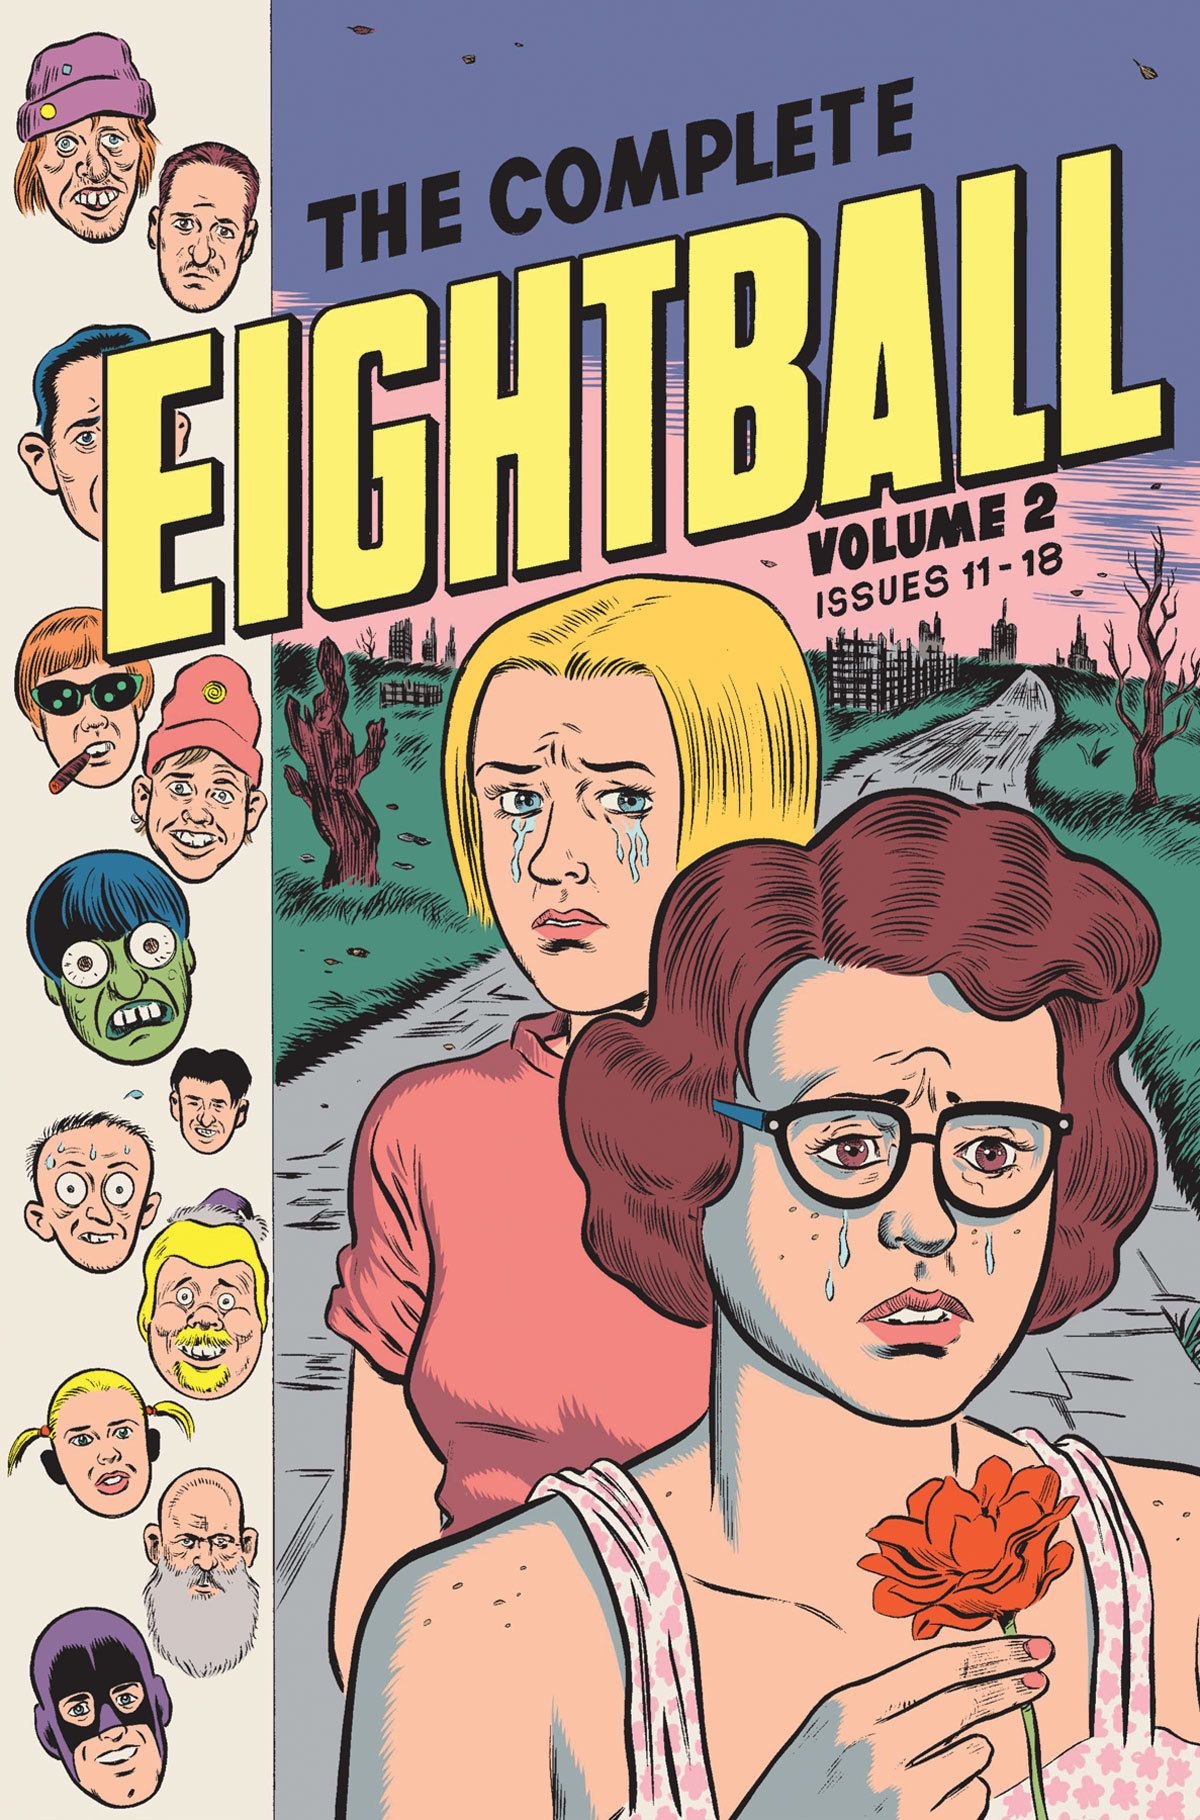 daniel clowes body image 1422612789 Nice Art: Clowes cover for The Complete Eightball is revealed